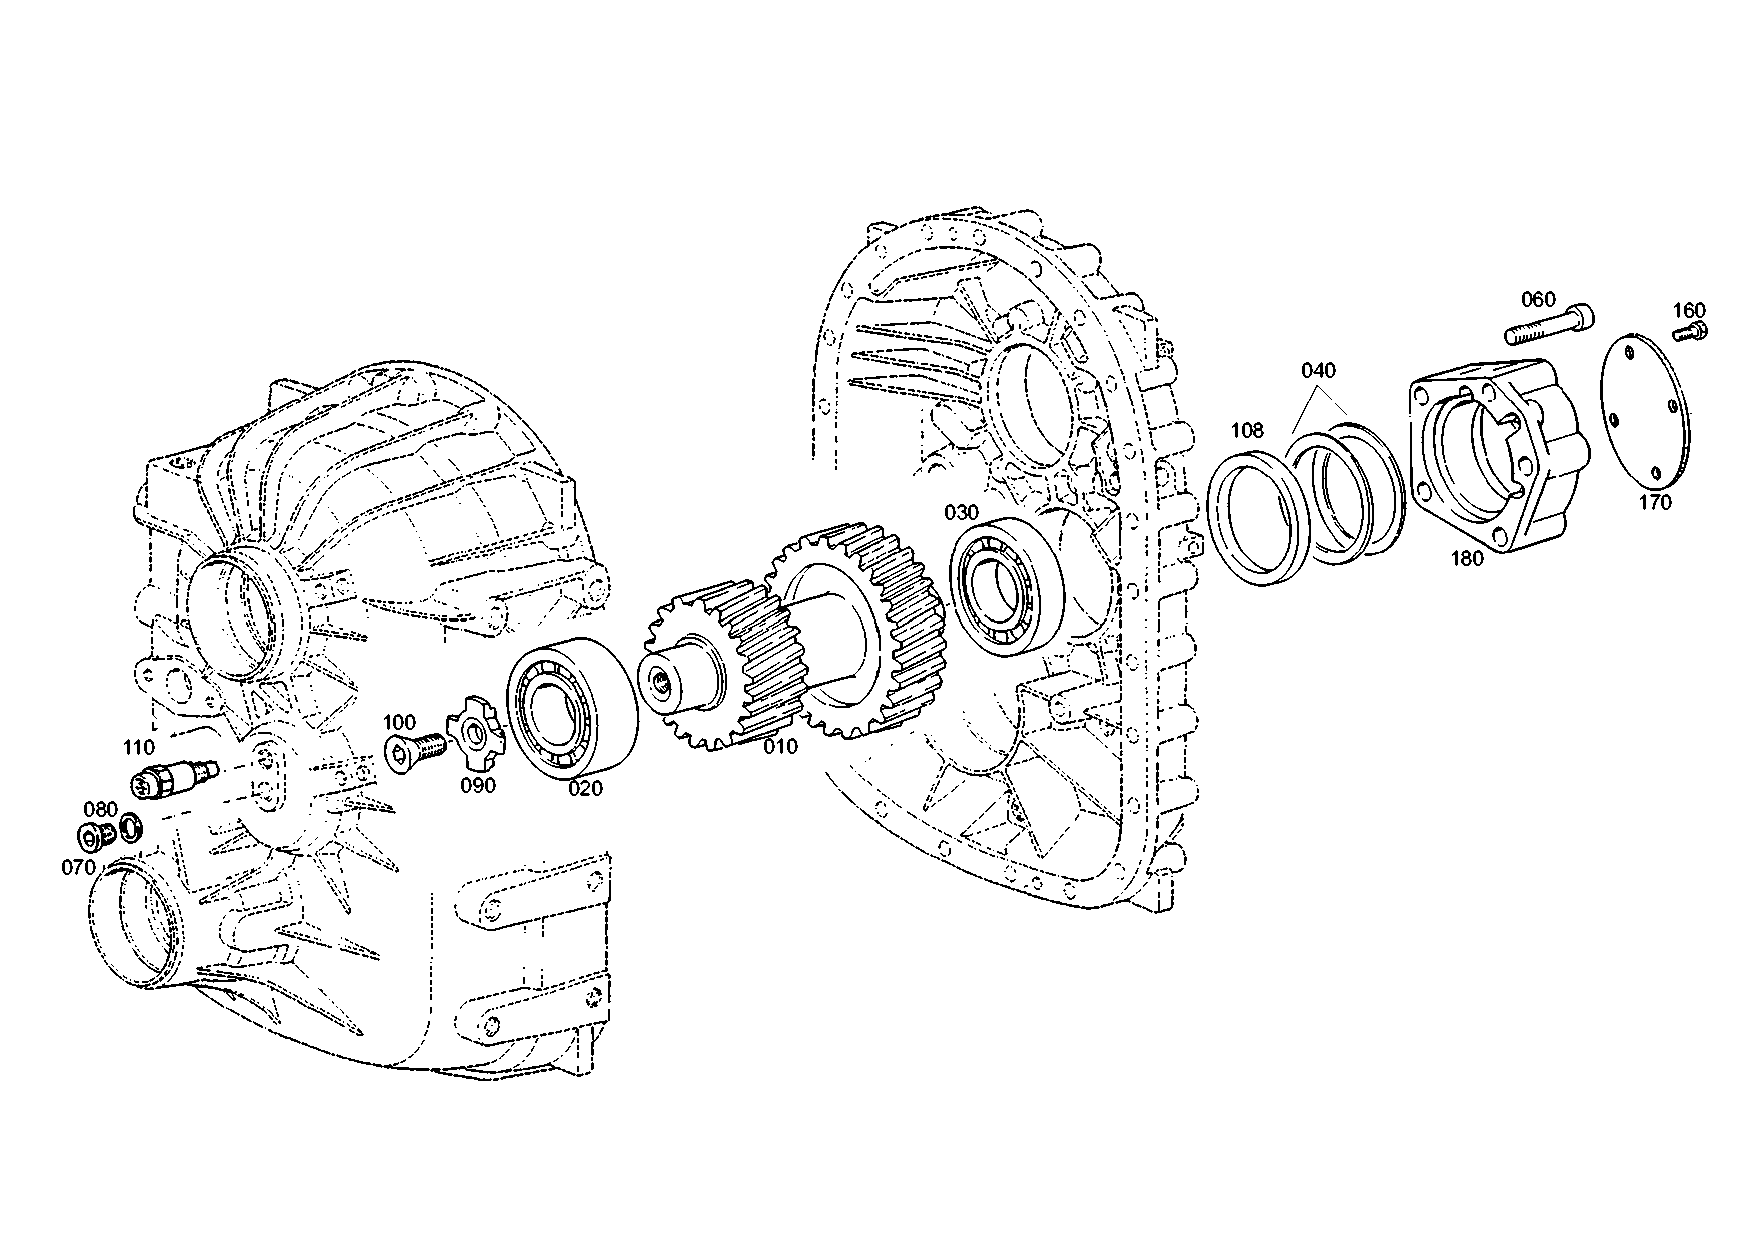 drawing for RENAULT 170750220080 - DOUBLE GEAR (figure 3)